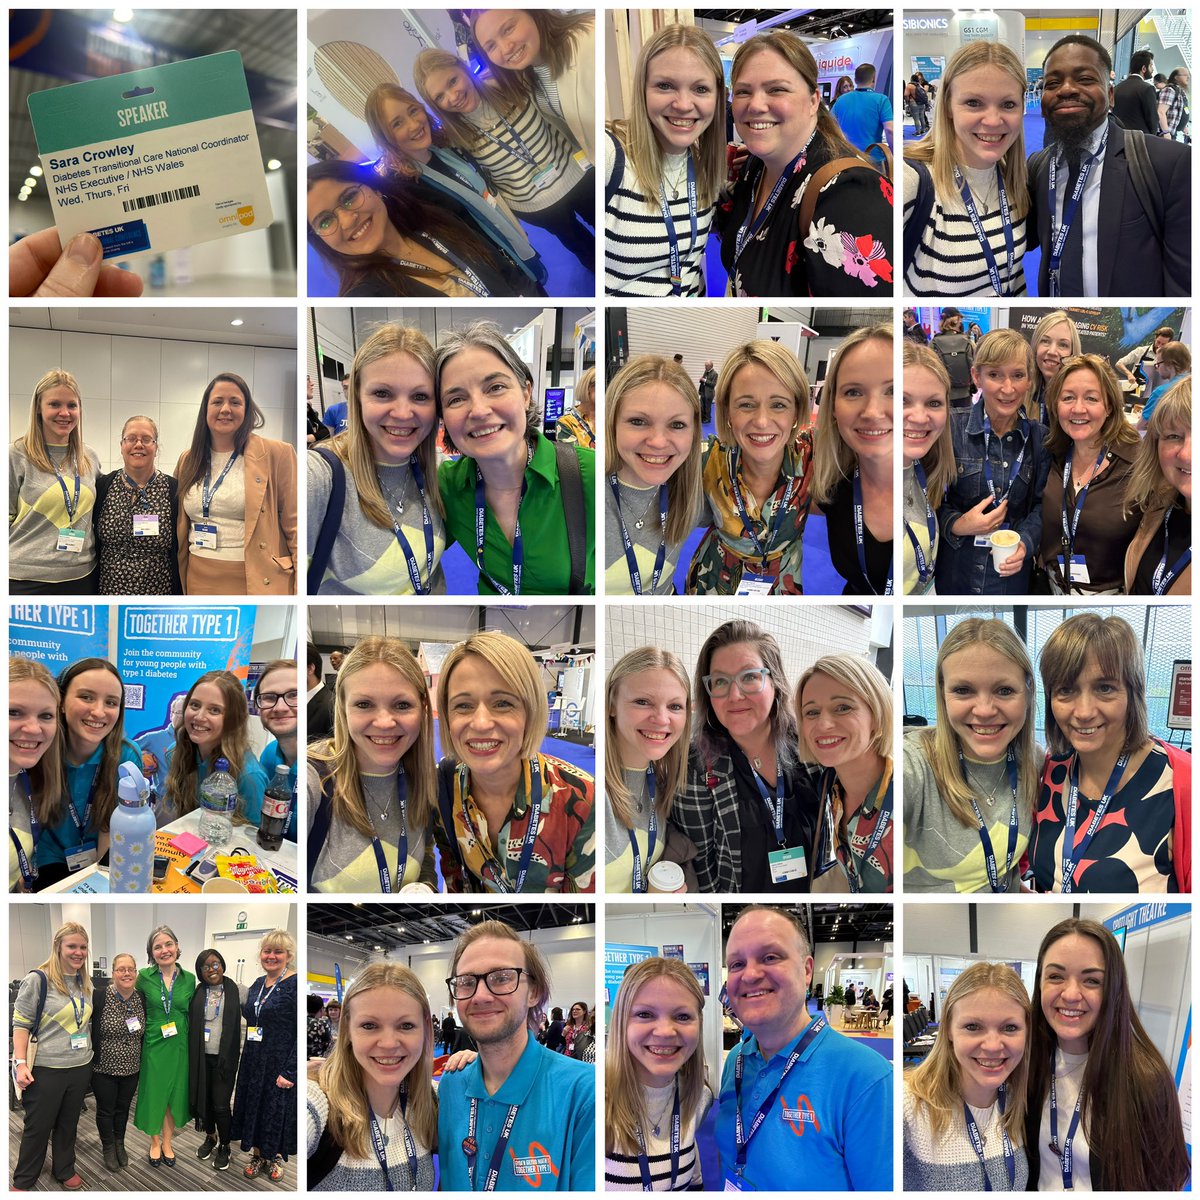 One of the best things diabetes has taught me is that it’s made better by the people you meet along the way. From old friends to new friends, Twitter friends to in-real-life friends, colleagues and clinicians I highly respect, to a community I truly value, and more… #DUKPC24 💙